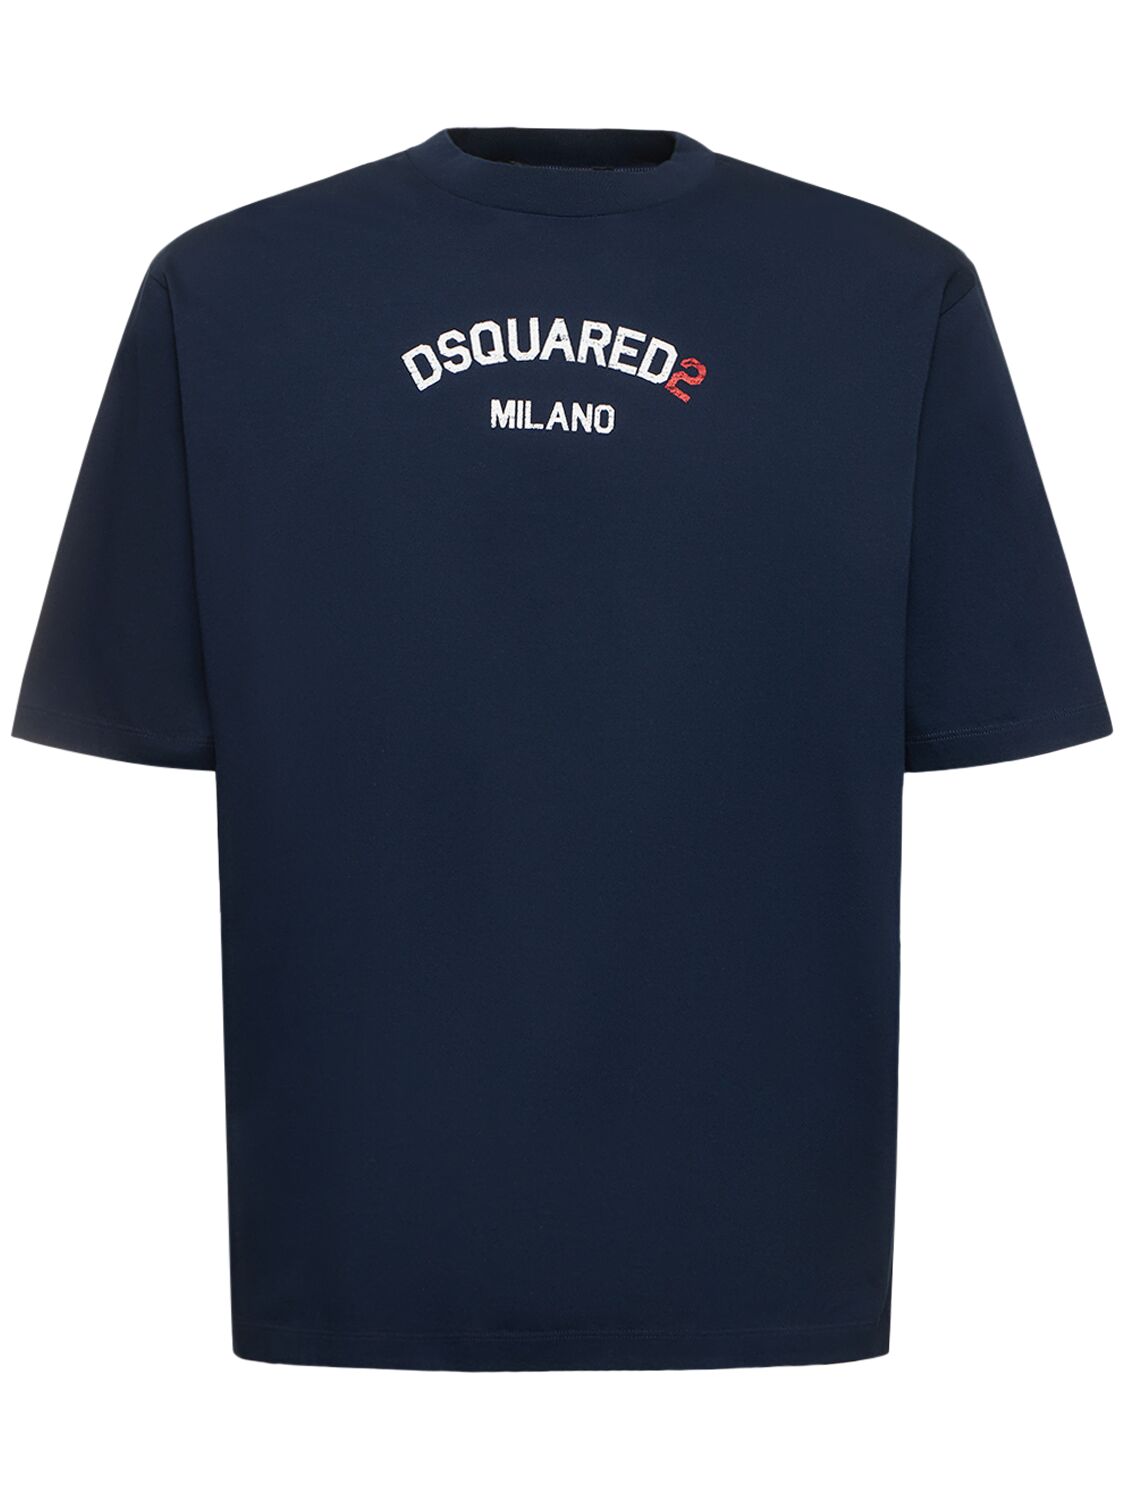 Dsquared2 Milano Printed Cotton T-shirt In Navy